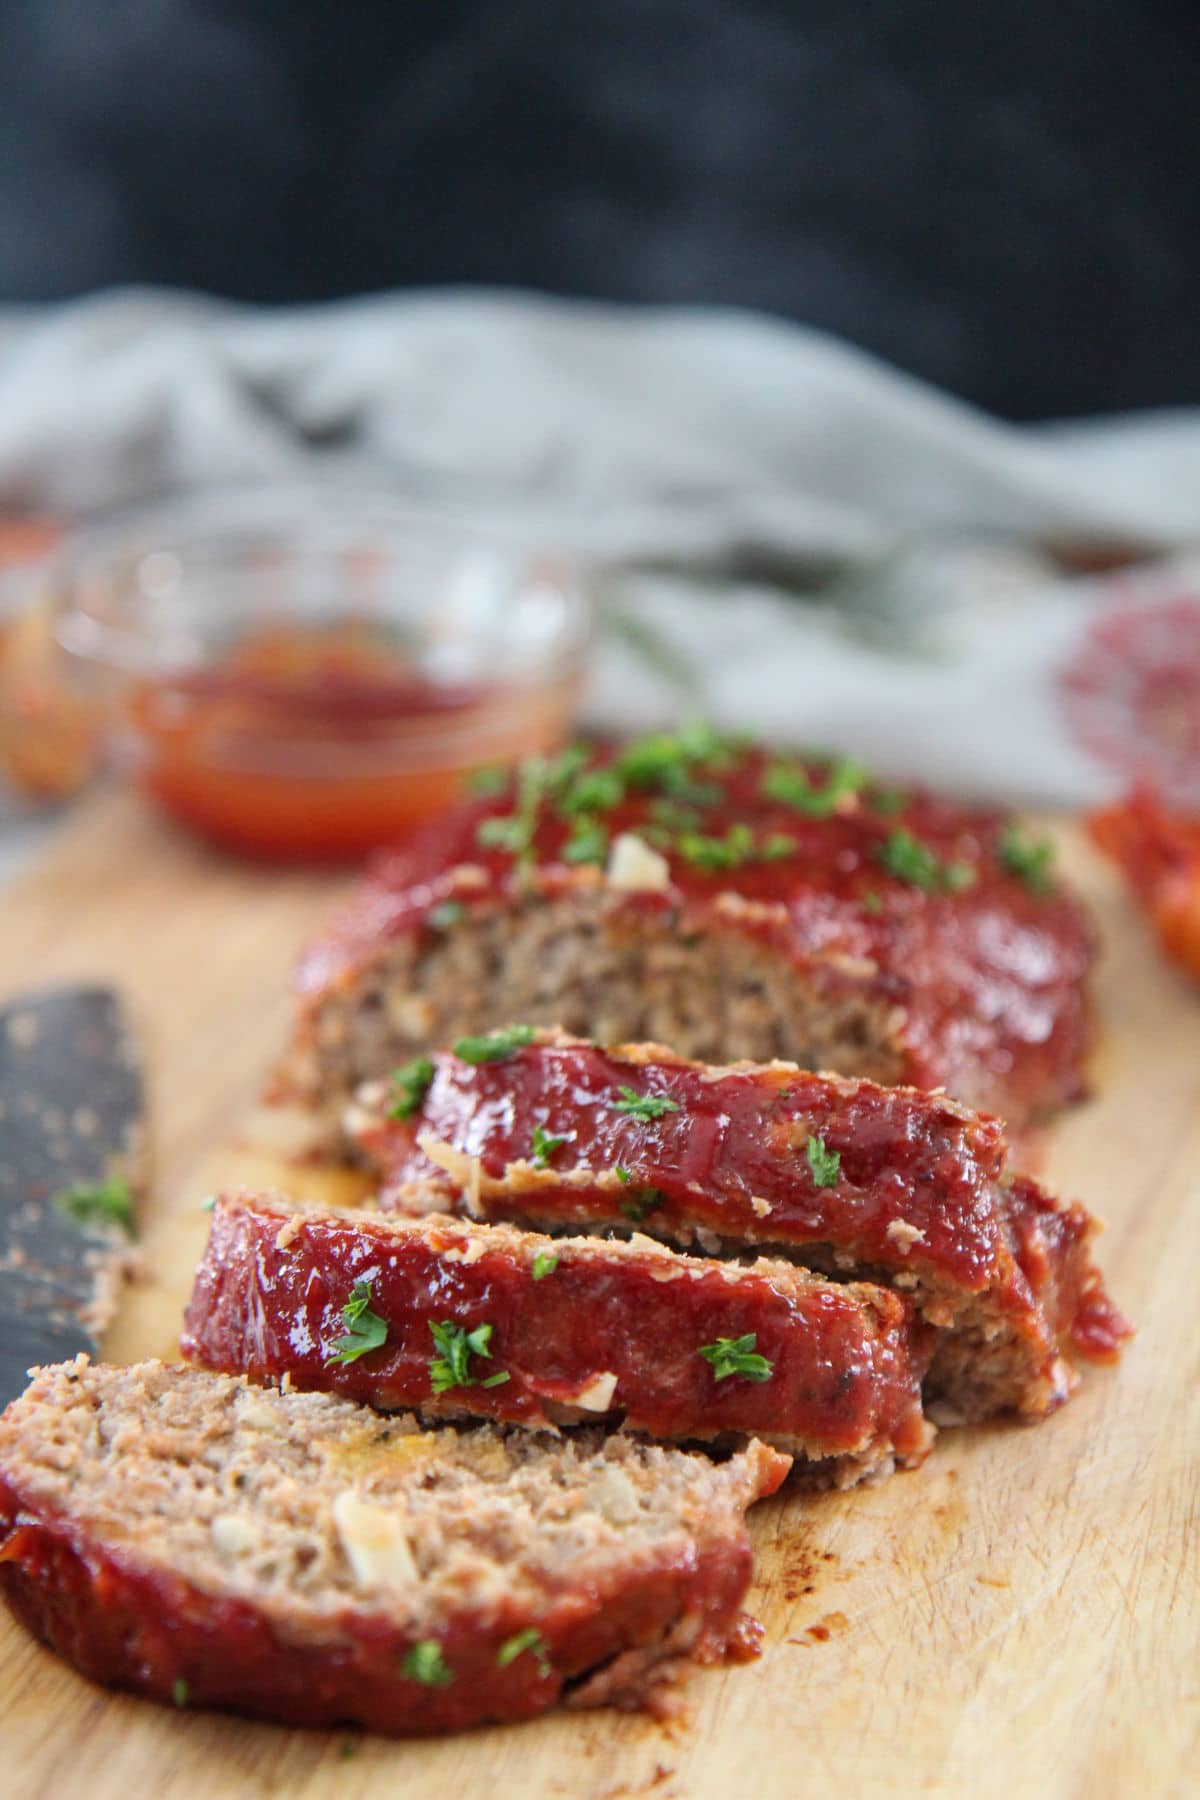 slices of turkey meatloaf on a wooden board with ketchup on the side